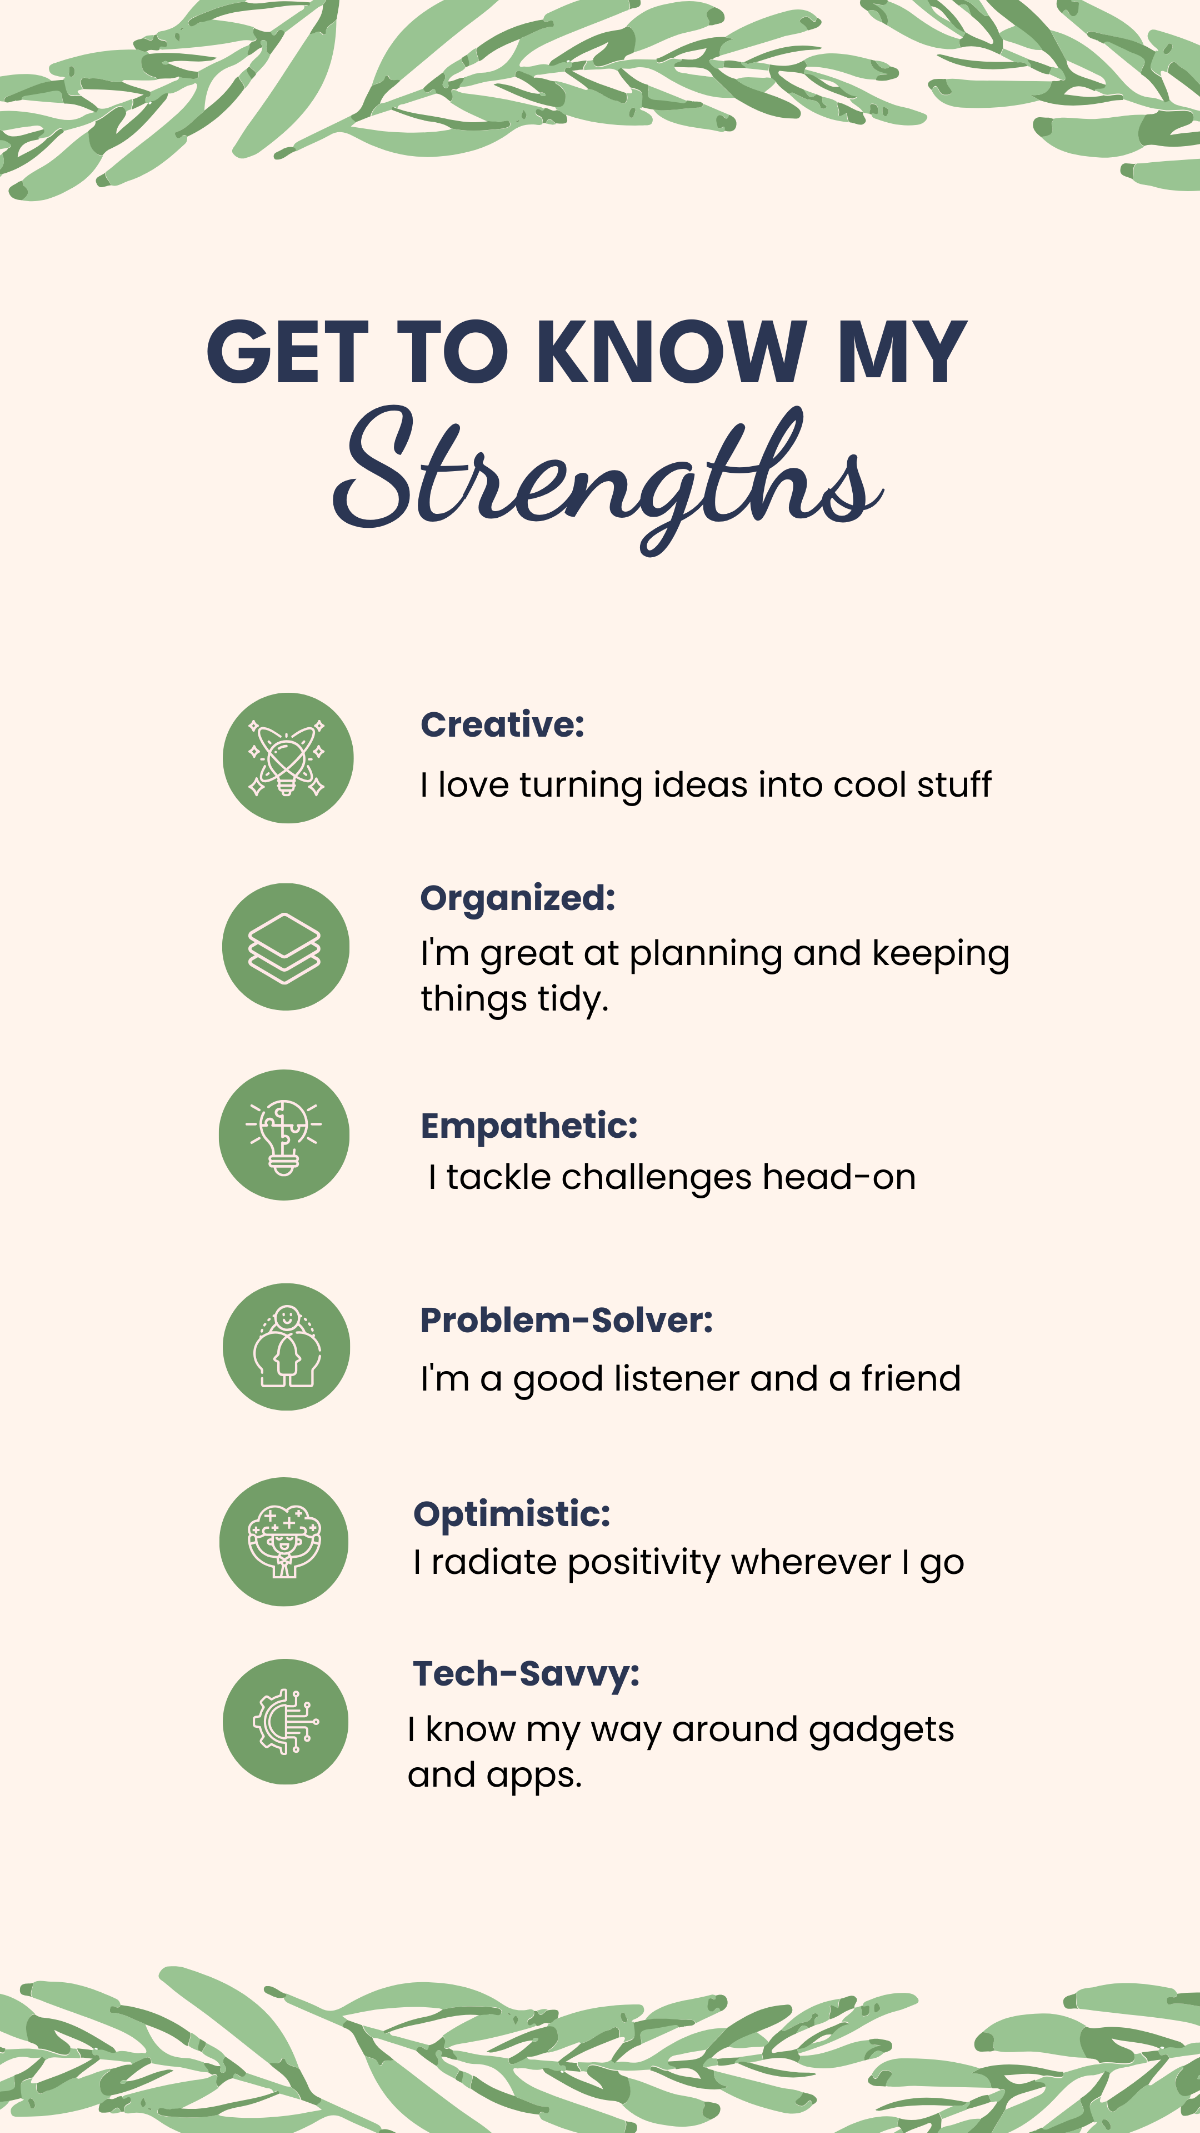 Get to Know My Strengths Template